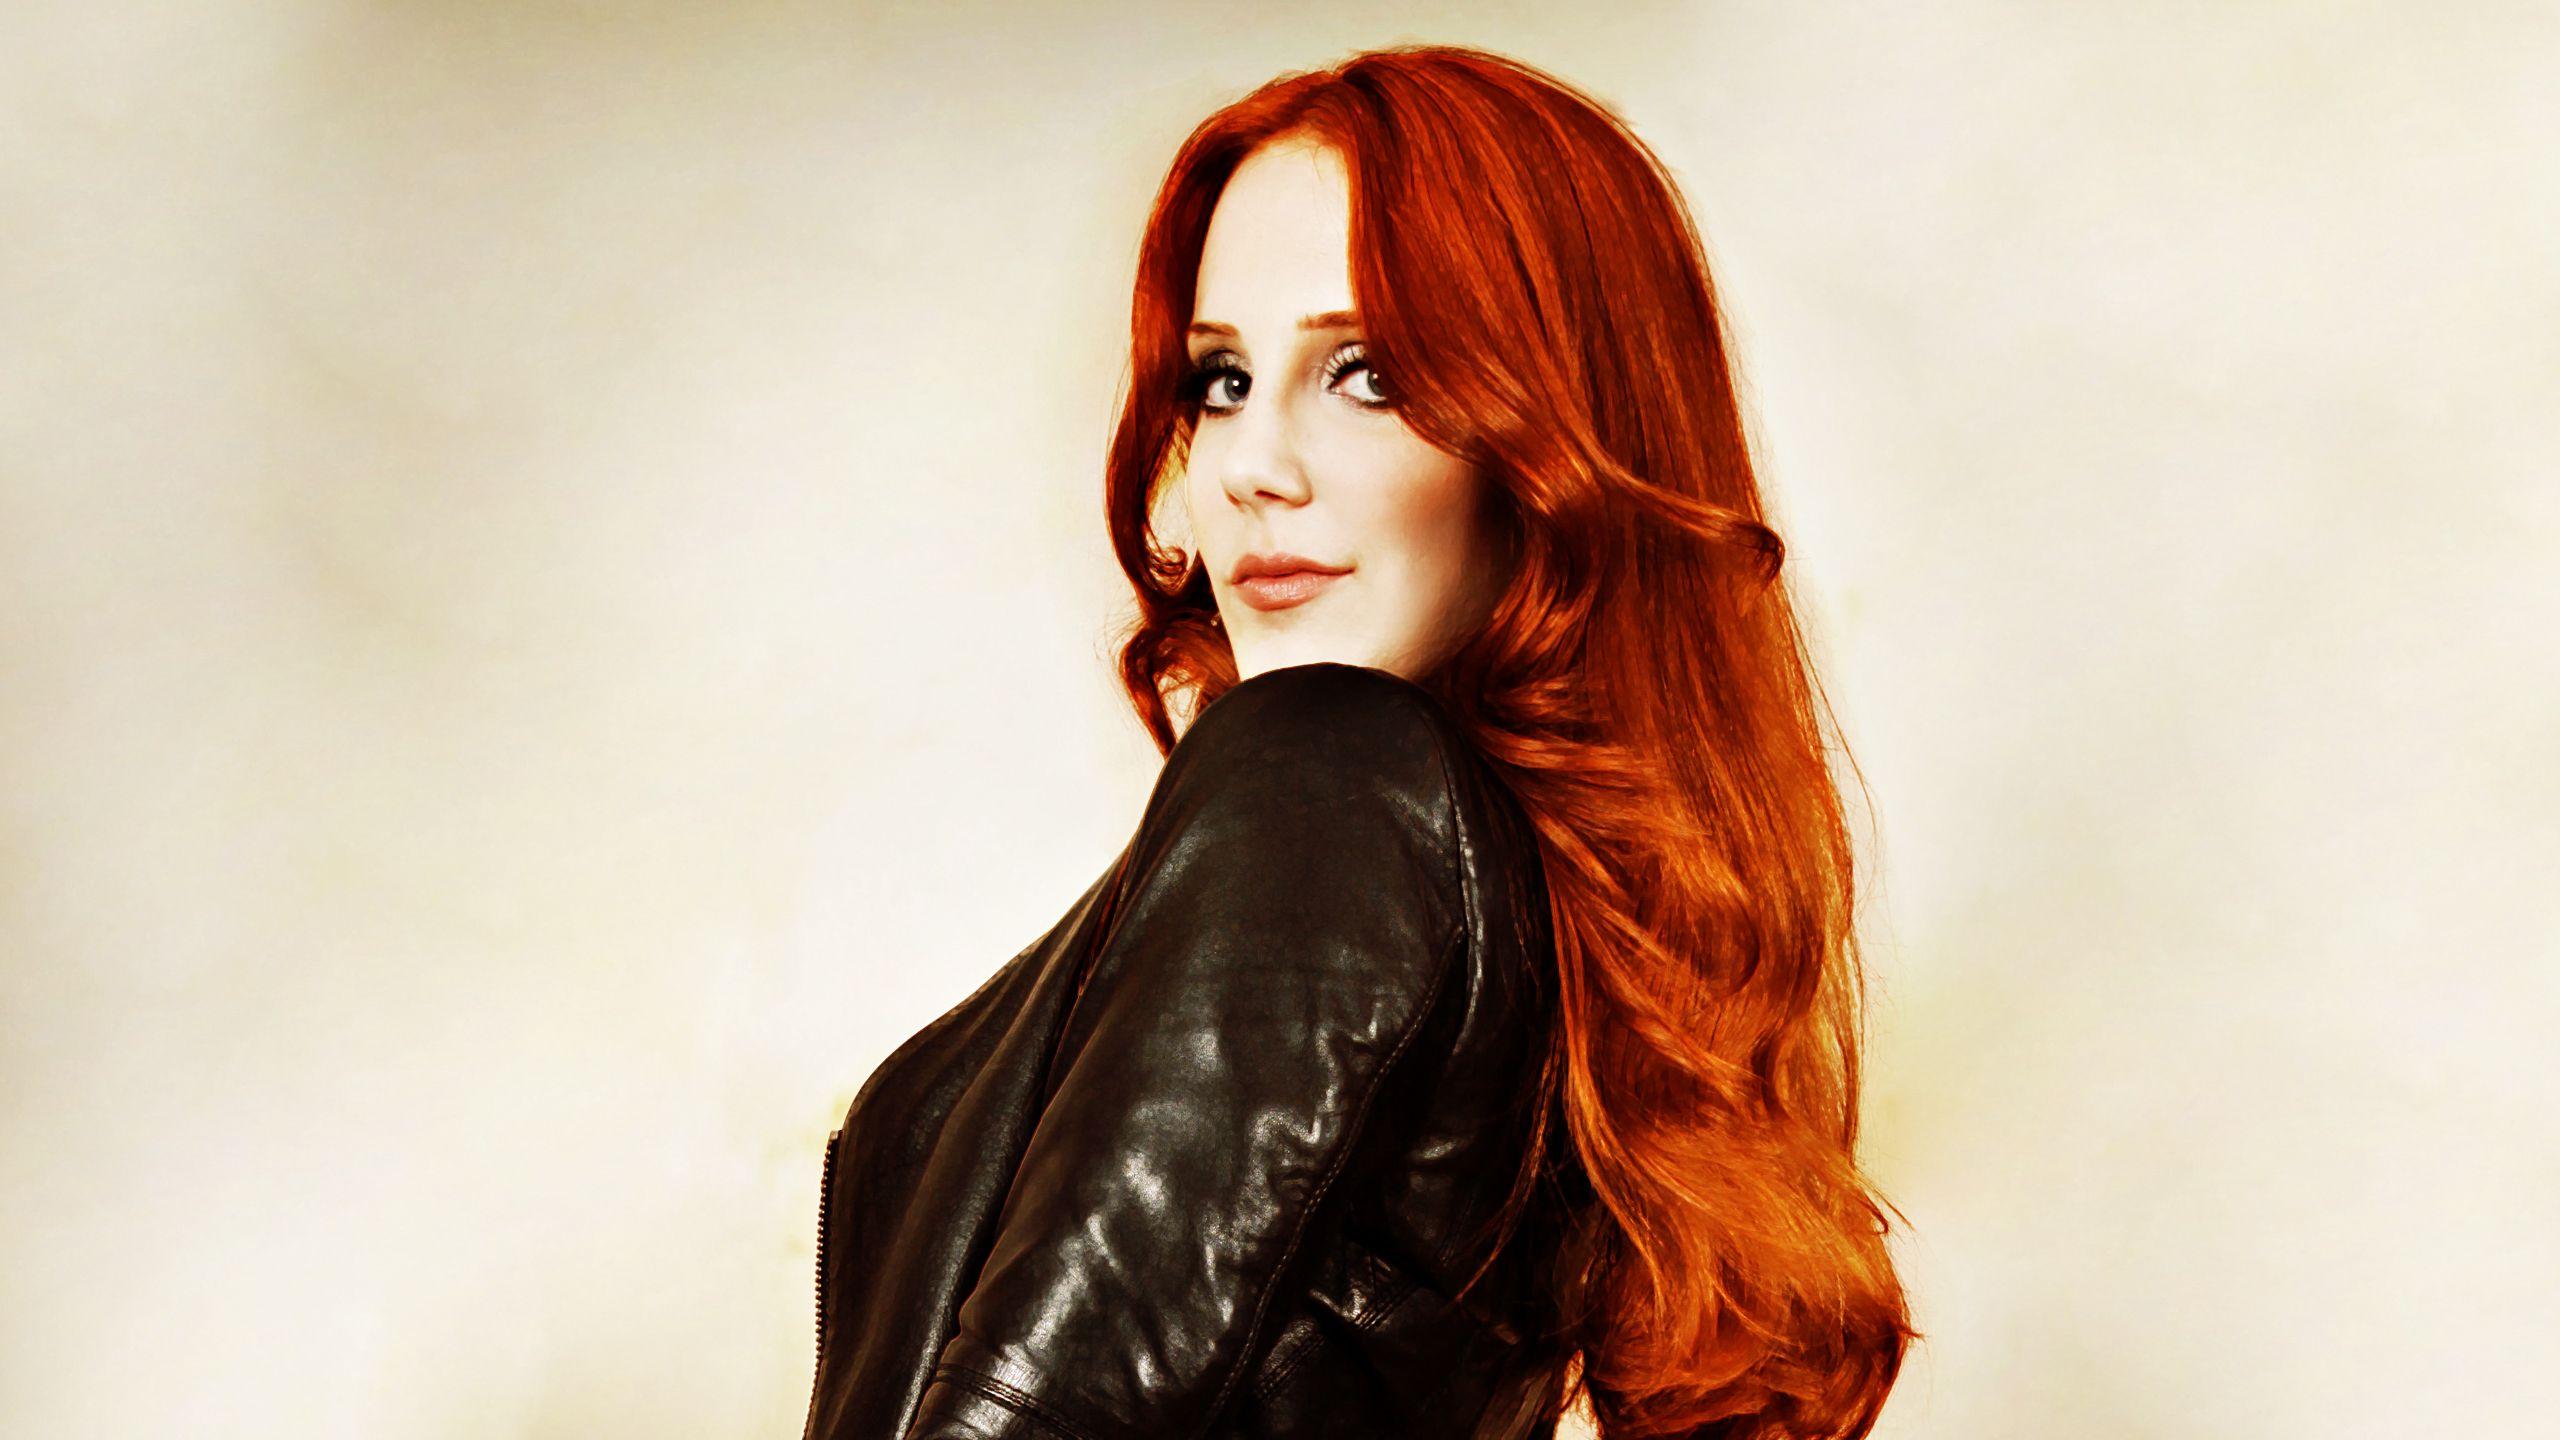 Top Simone Simons Pic In High Quality GoldWallpaper